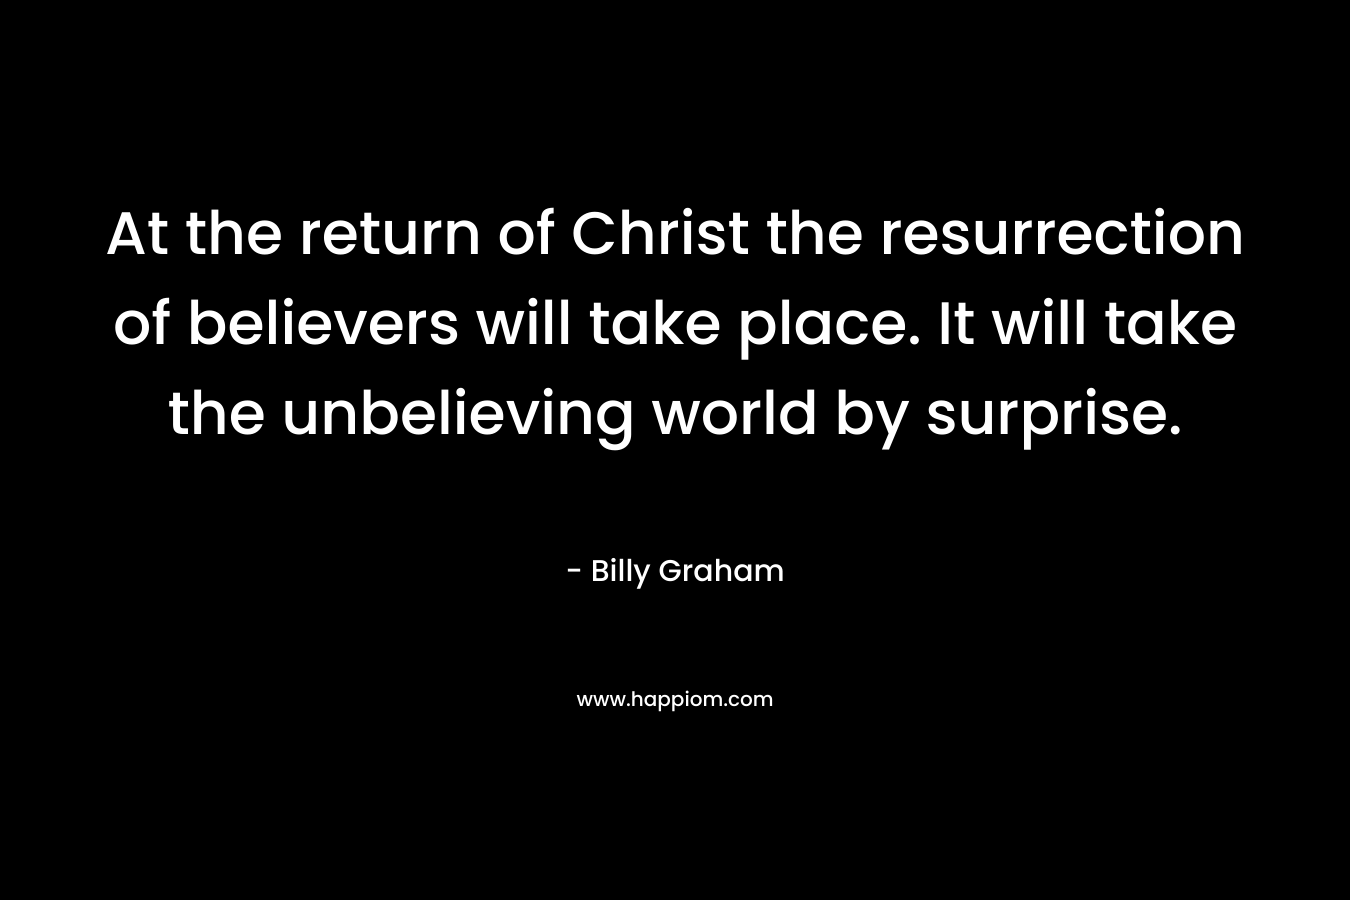 At the return of Christ the resurrection of believers will take place. It will take the unbelieving world by surprise. – Billy Graham